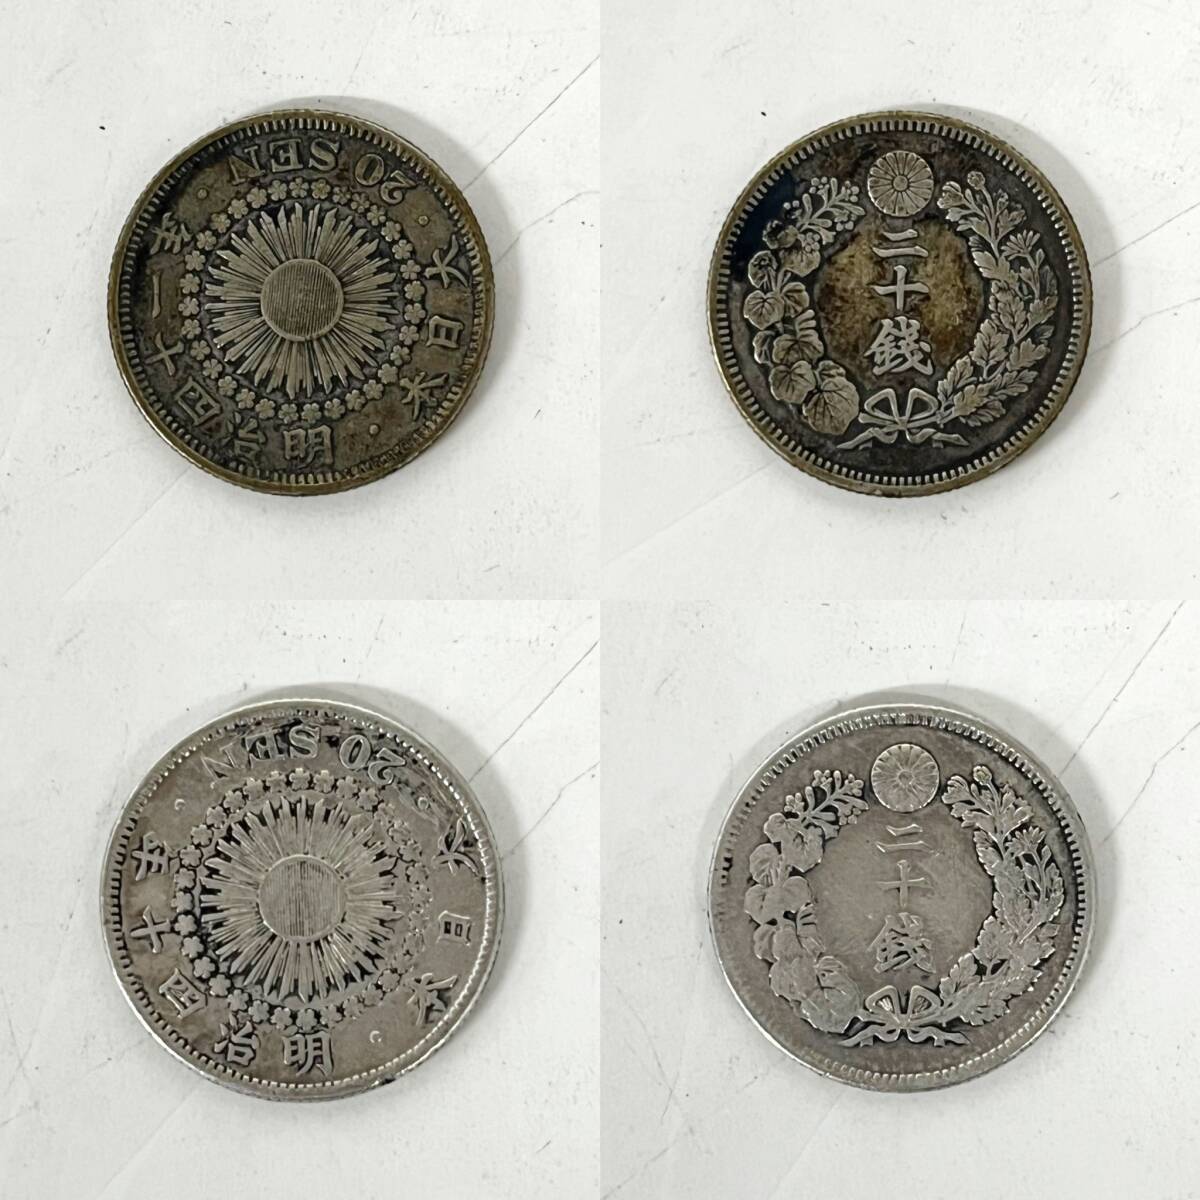 1 jpy ~[ collector discharge goods ] Japan old coin set sale Meiji 3 year Special year asahi day dragon large dragon asahi day small size phoenix 50 sen 20 sen 1 jpy silver coin gross weight 112.9g coin G123271